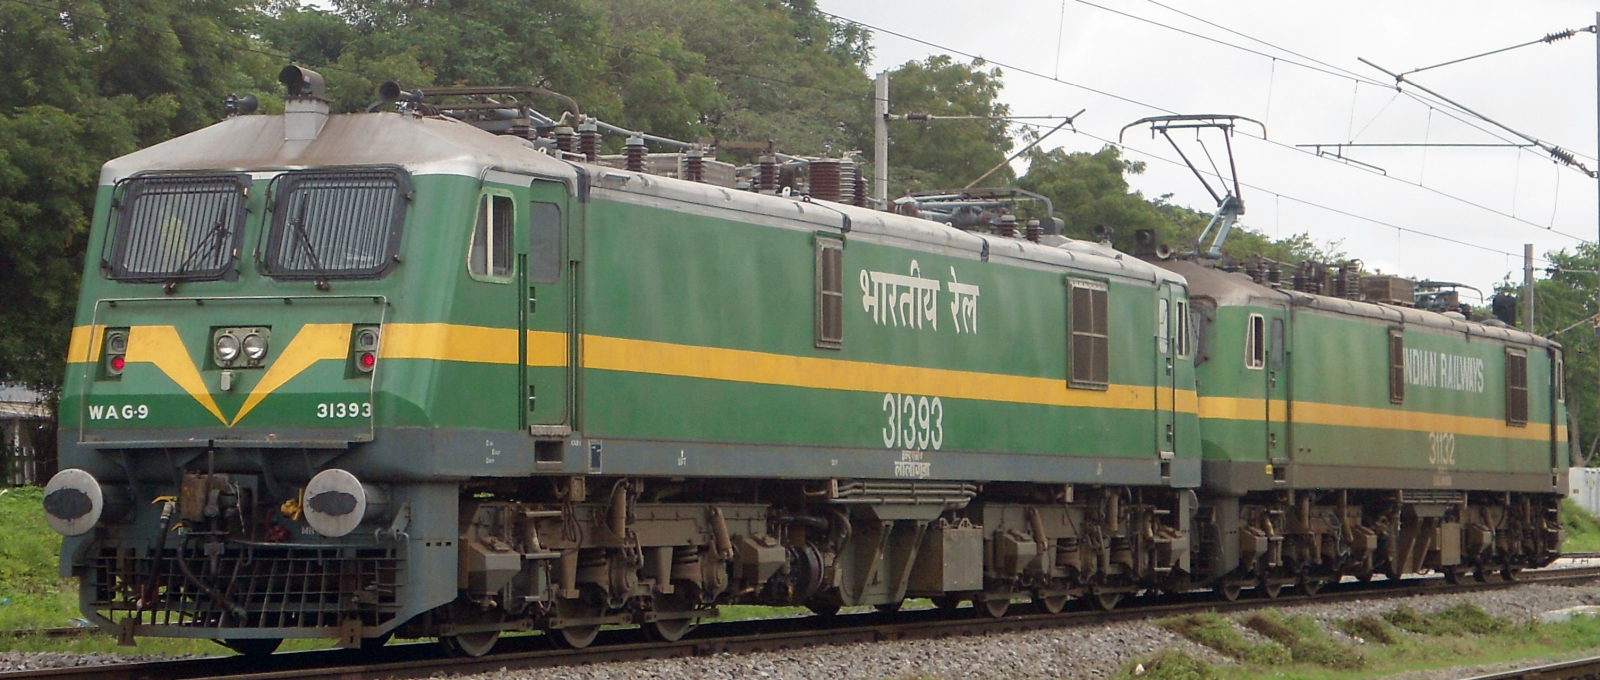 No. 31393 and No. 31132 in August 2013 at Ghatkesar Station, Hyderabad